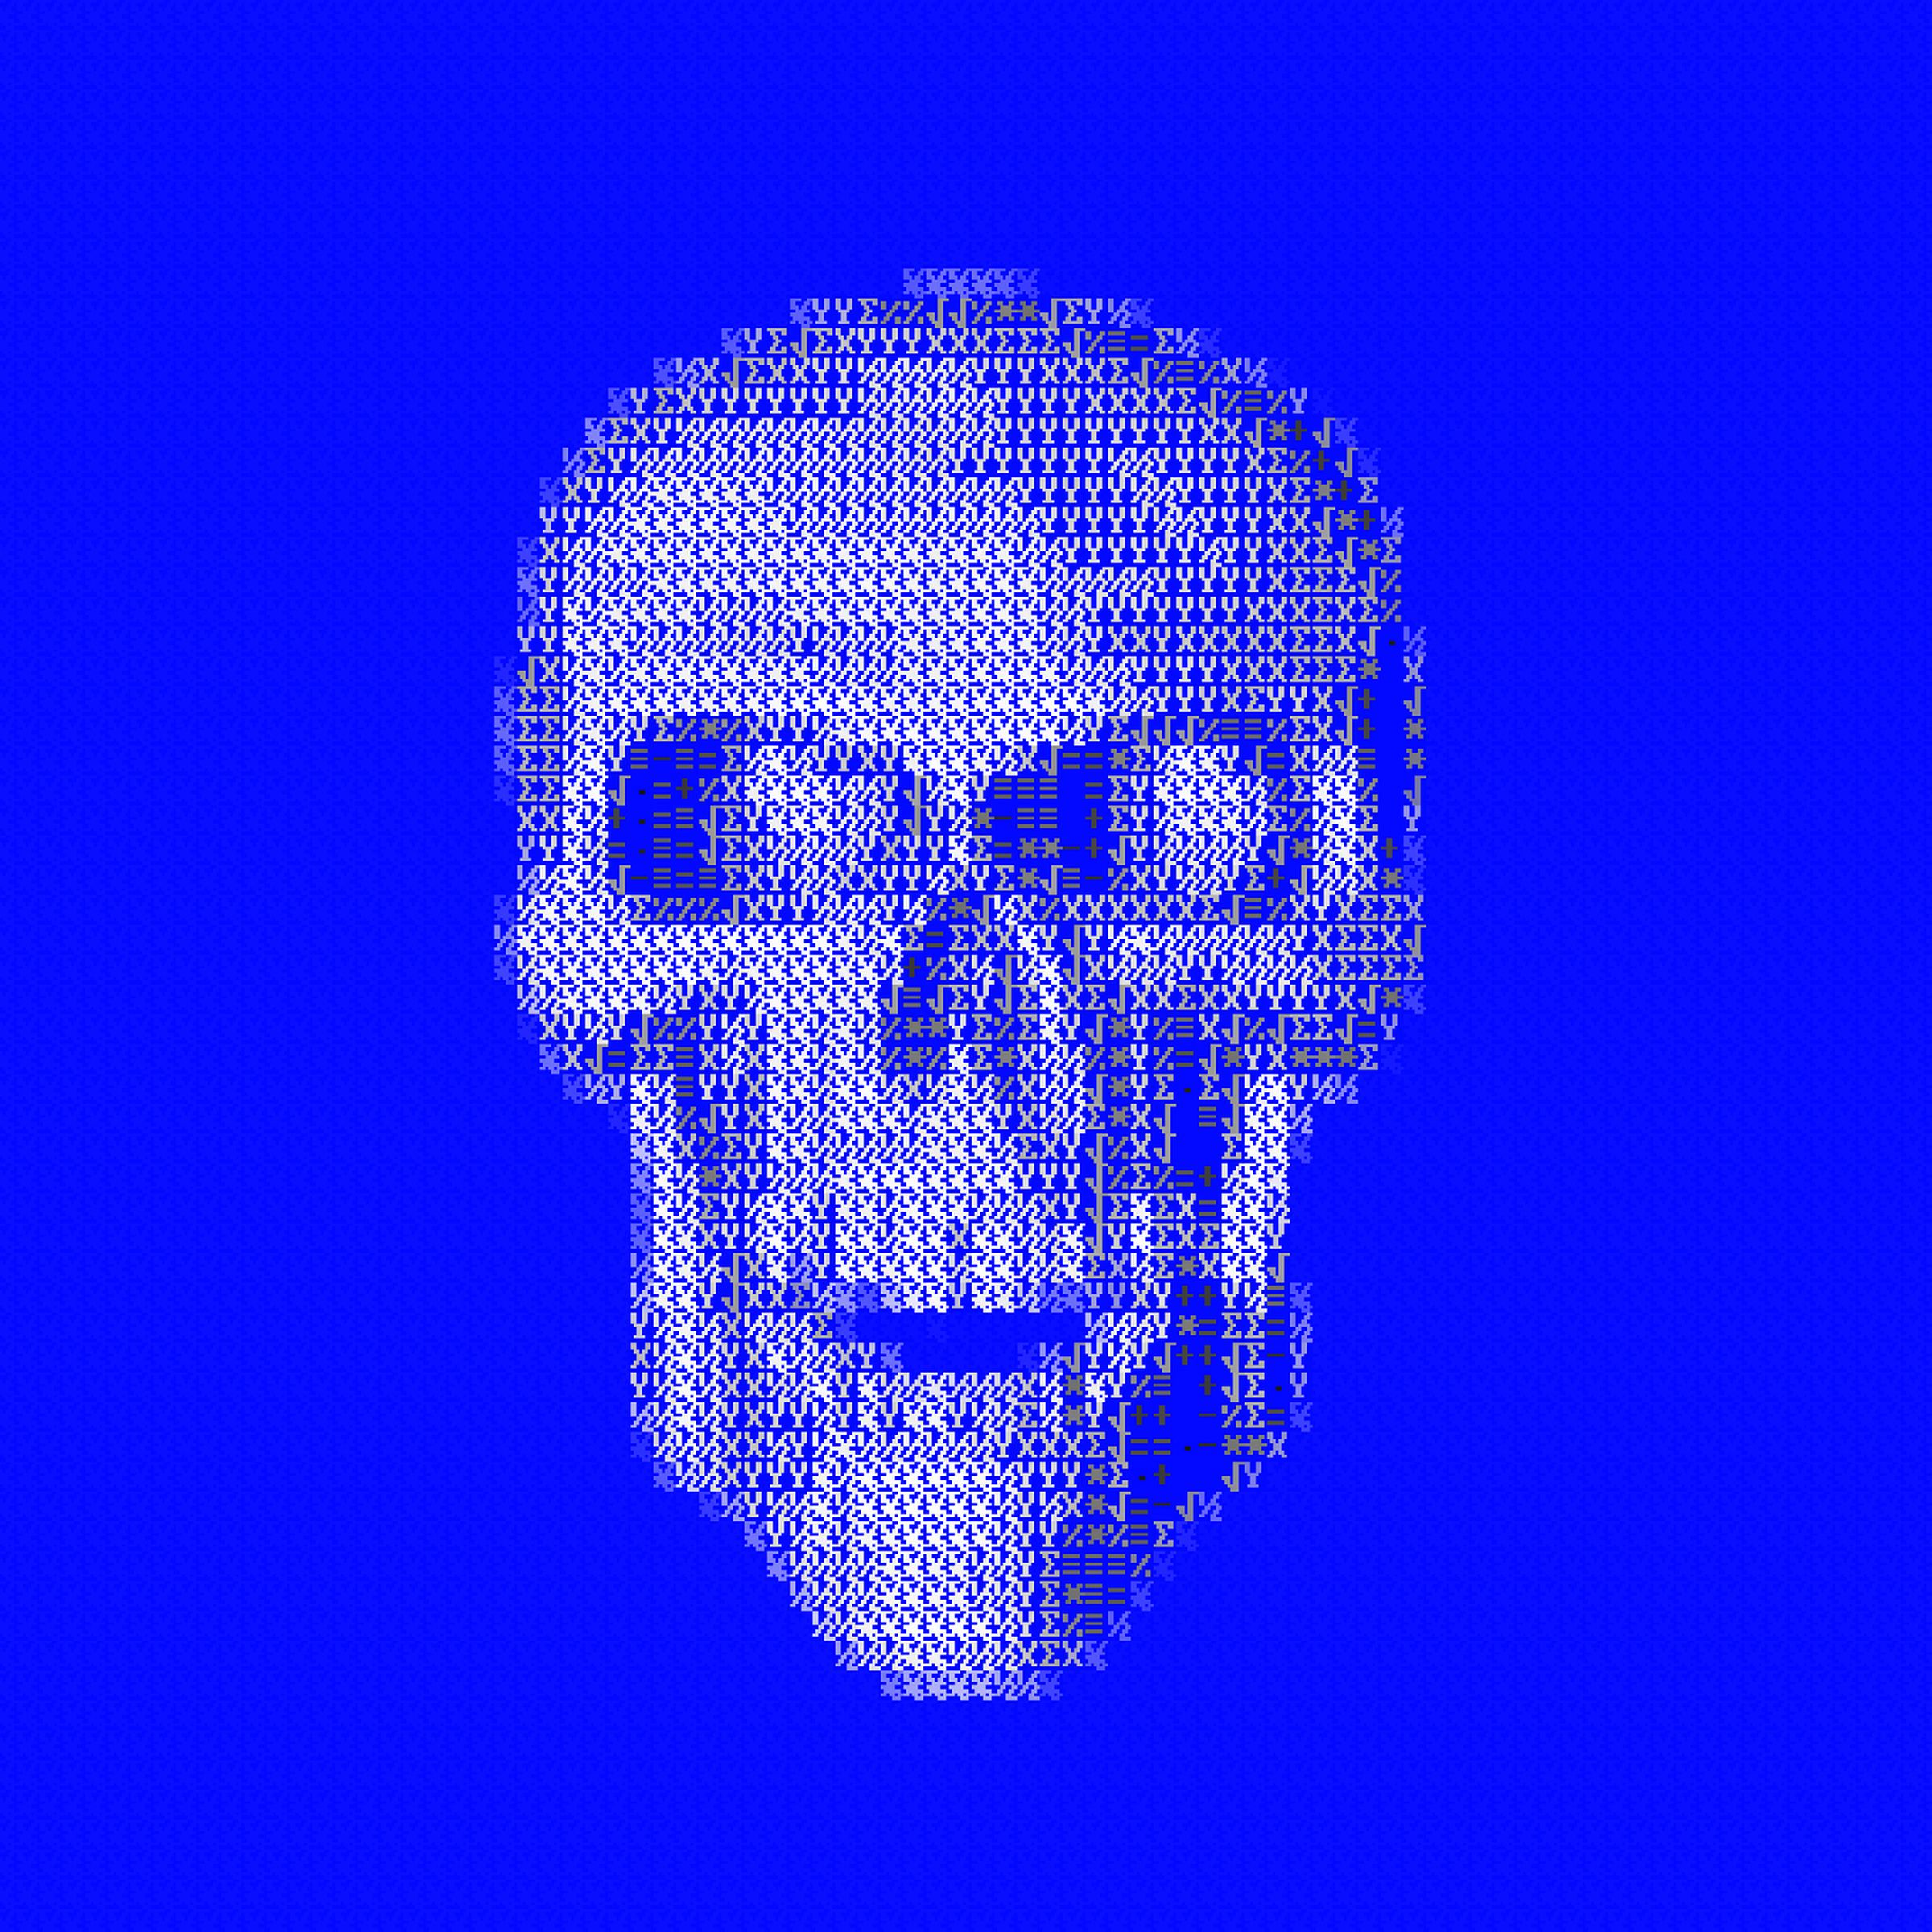 A laughing skull made out of code.